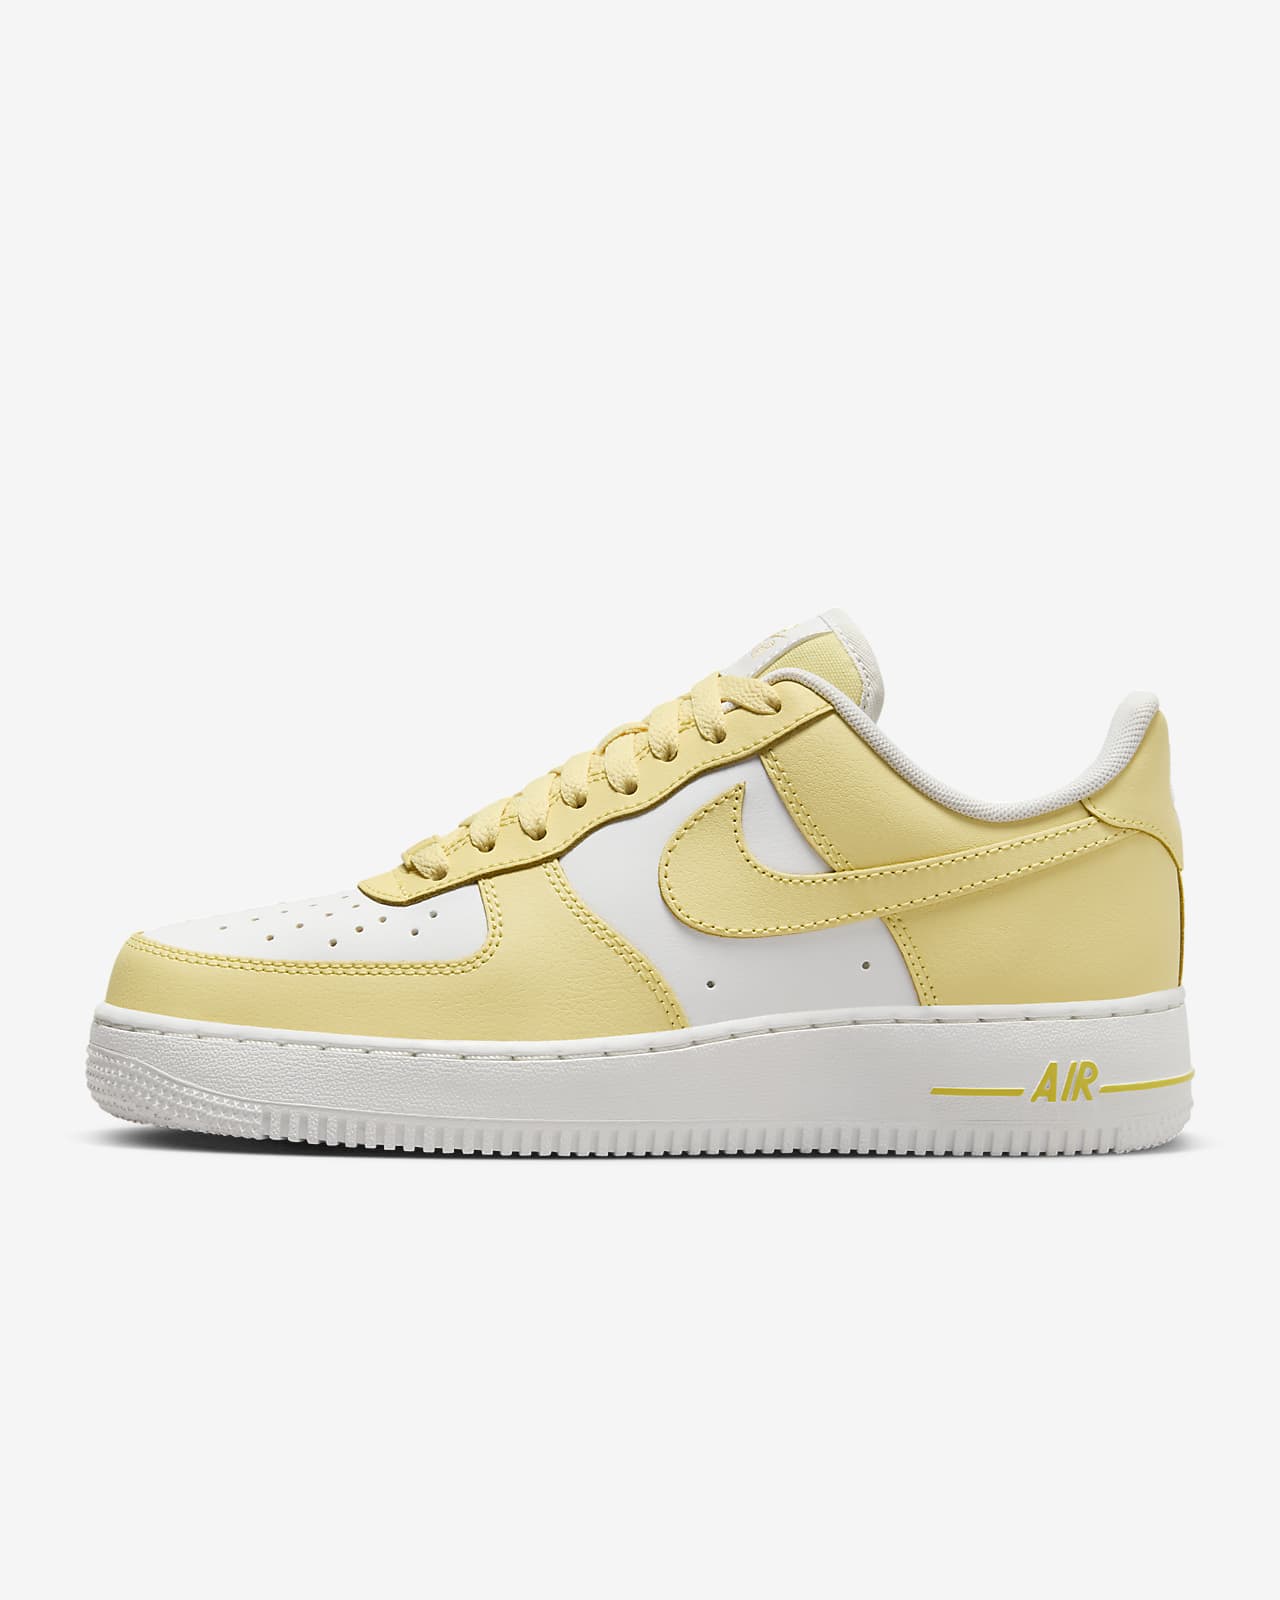 Chaussure Nike Air Force 1 '07 pour Femme